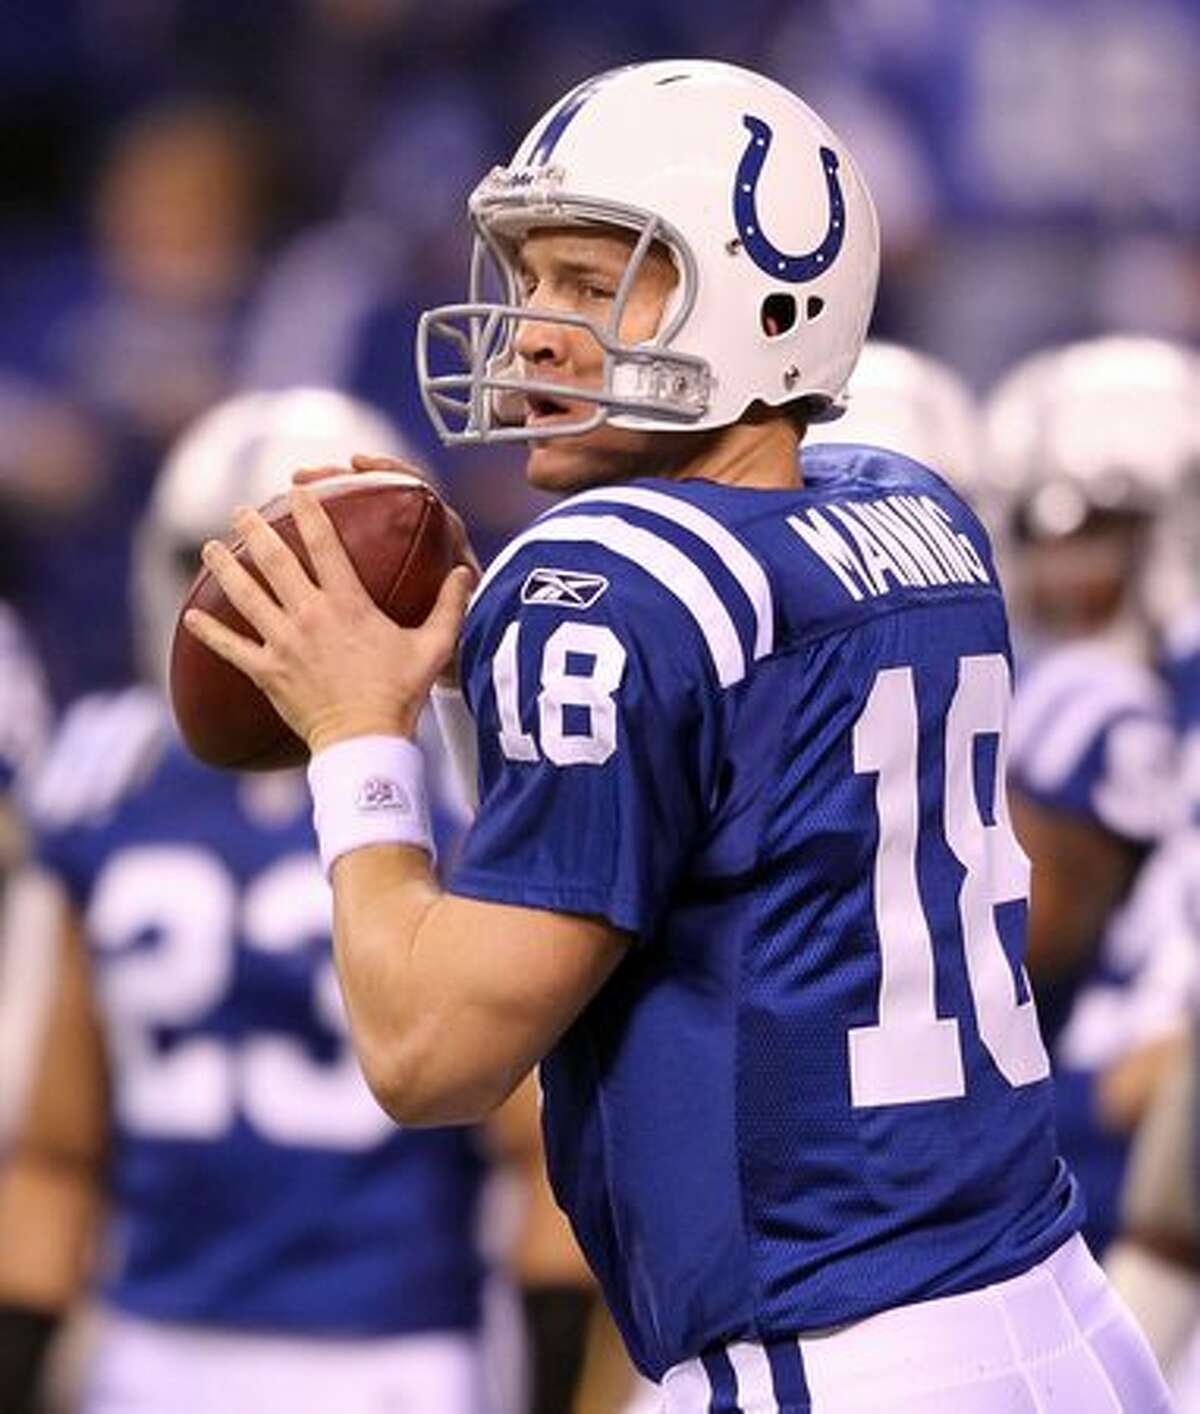 No. 4: Indianapolis Colts quarterback Peyton Manning, shown here throwing a pass on Nov. 28, 2010, before a game against the San Diego Chargers at Lucas Oil Stadium, in Indianapolis, Indiana.